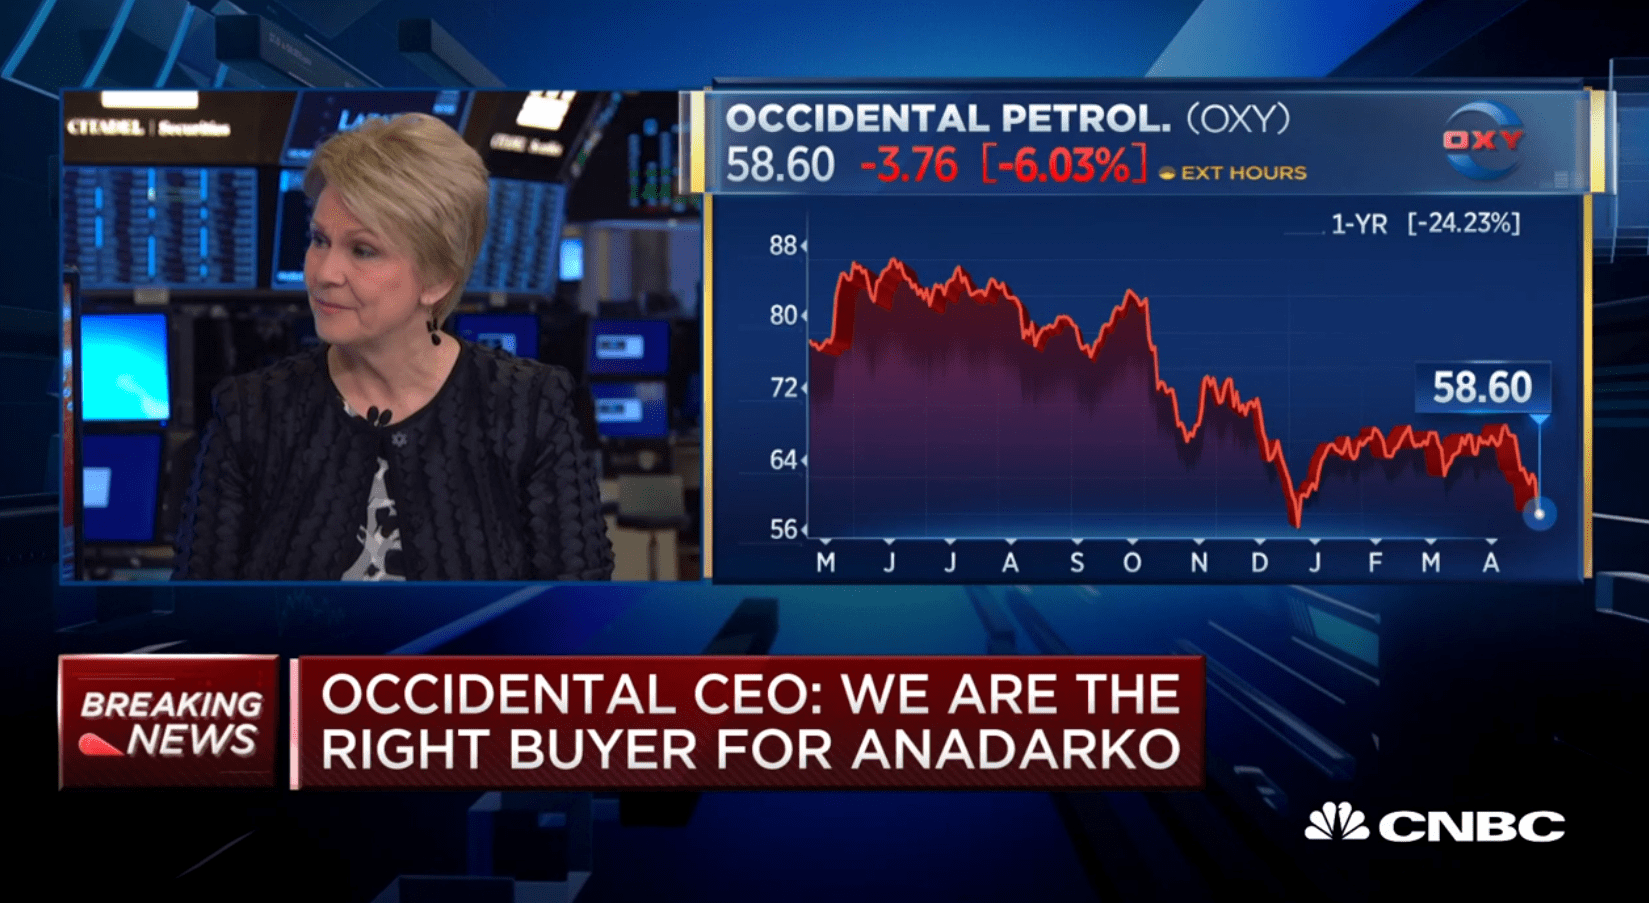 Occidental Petroleum CEO Vicki Hollub Speaks with CNBC’s David Faber Today